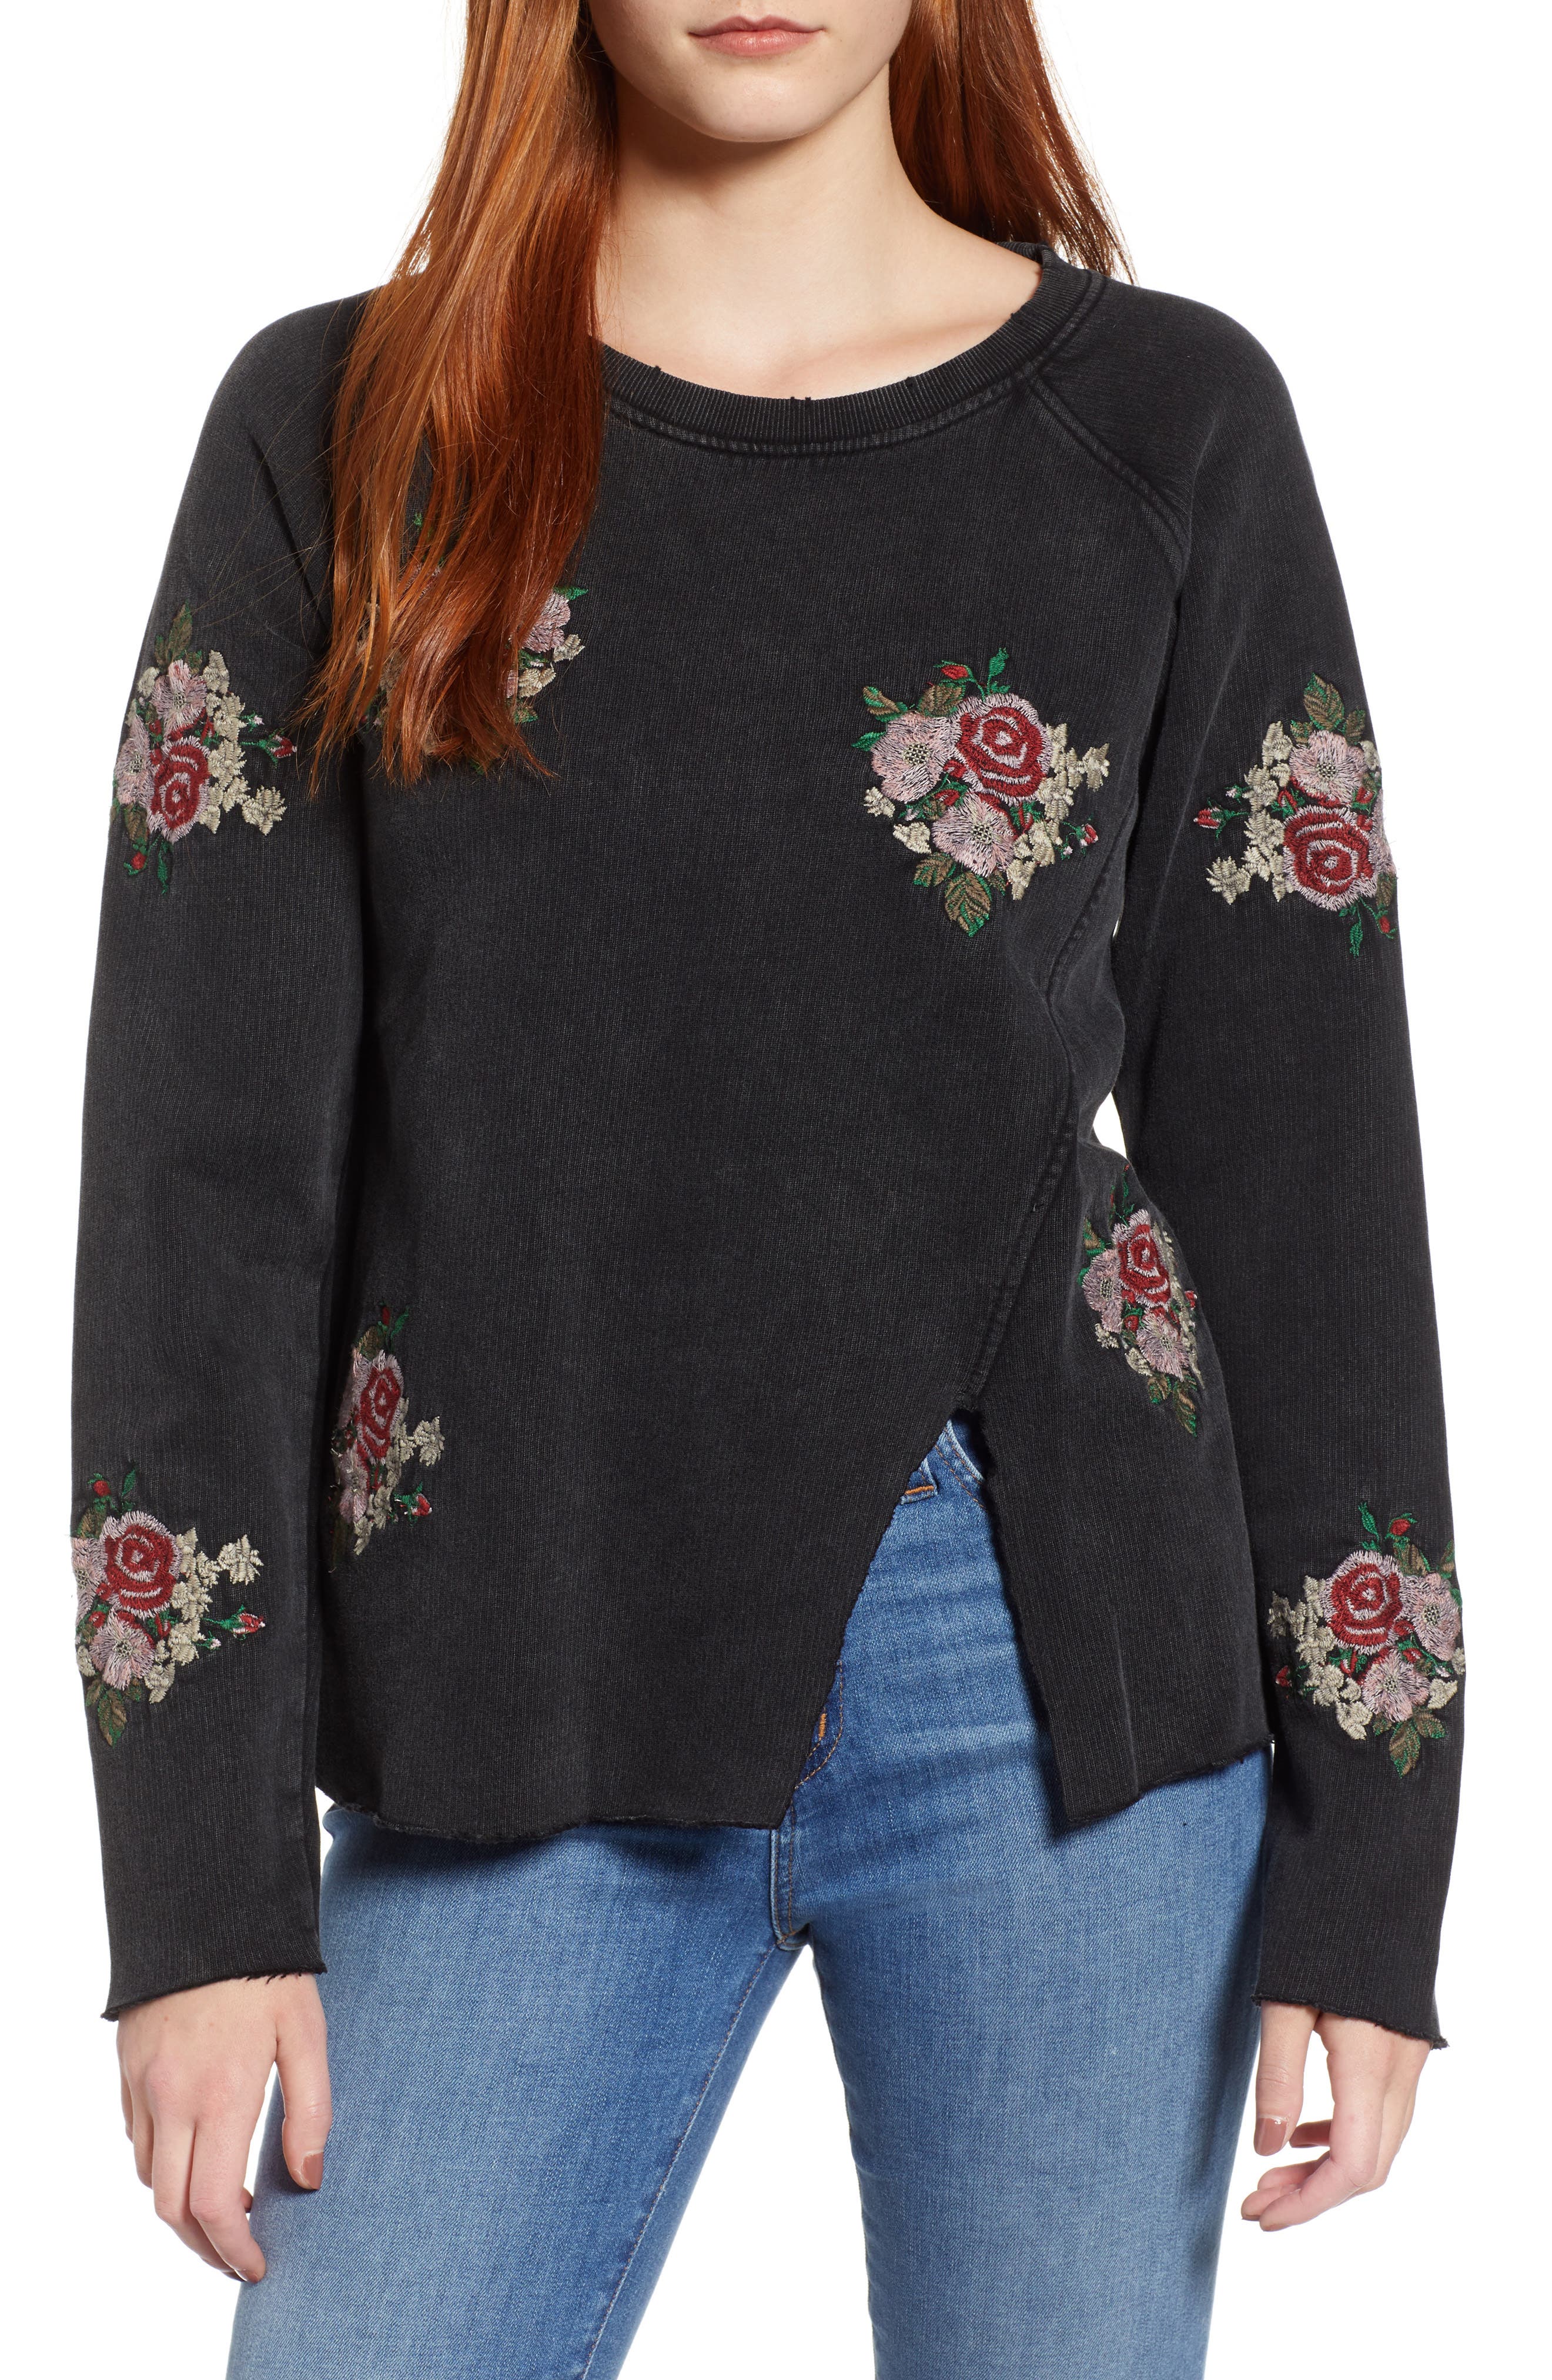 lucky brand floral embroidered jeans